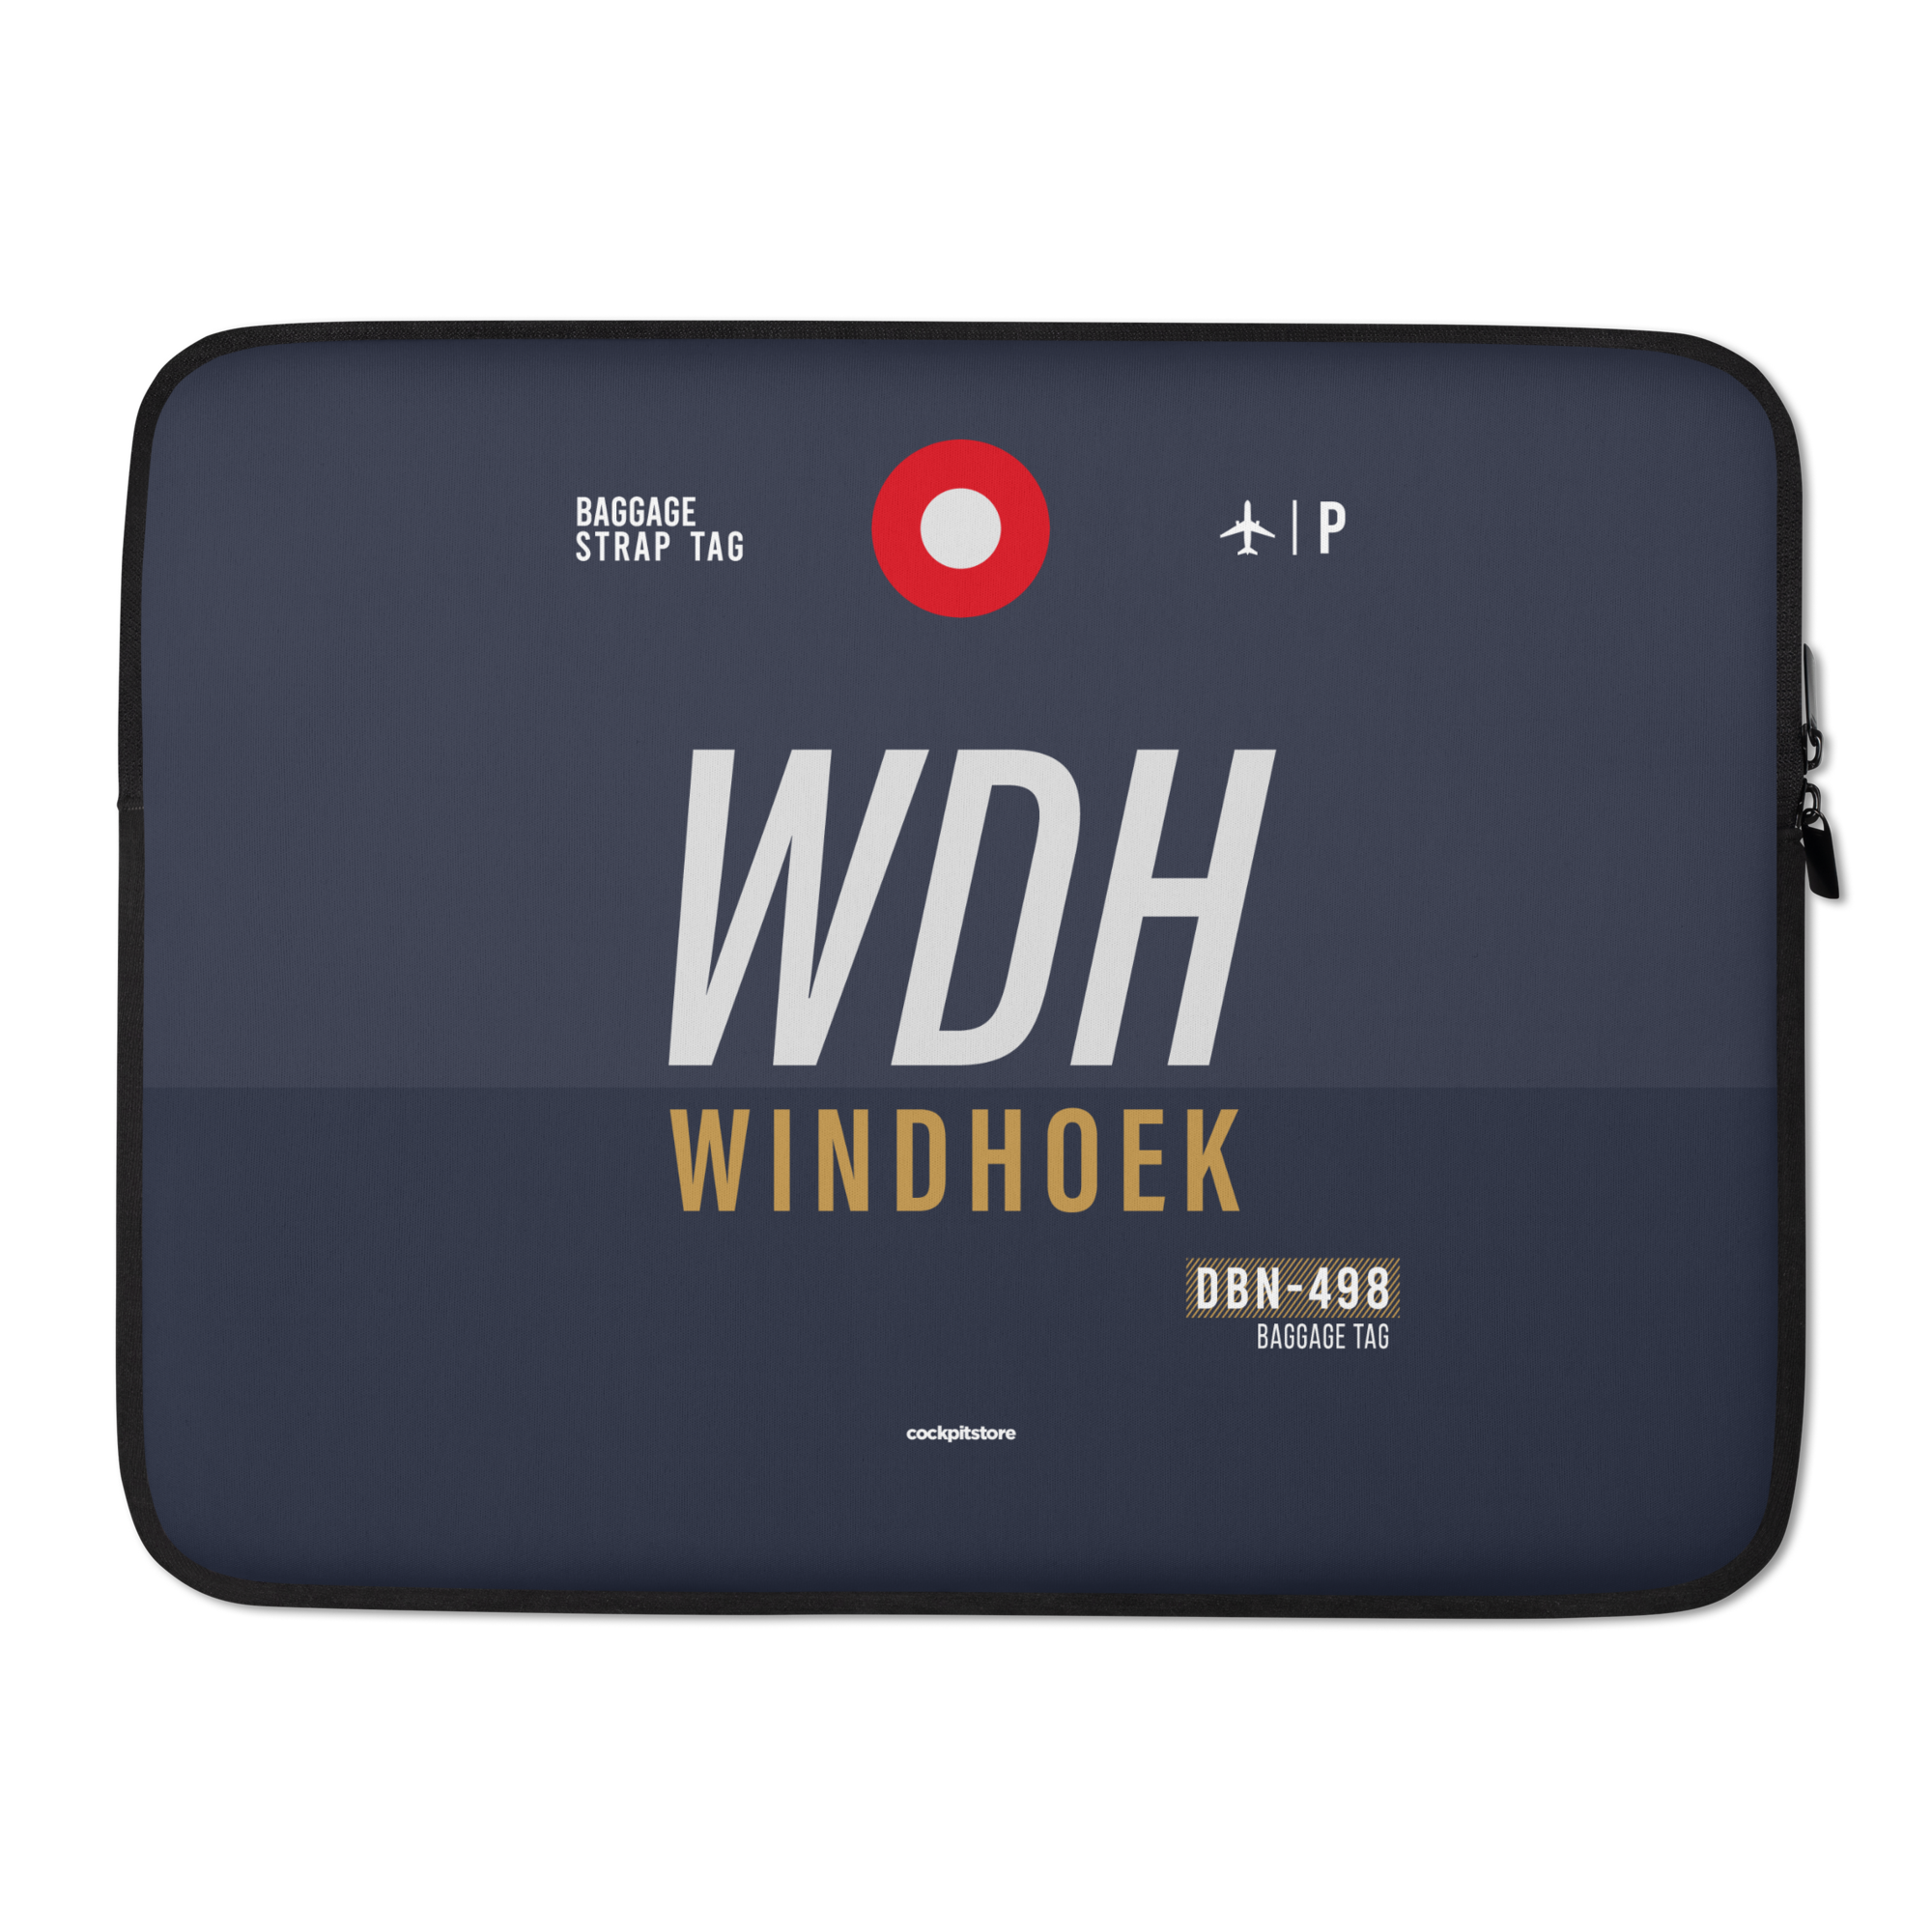 WDH - Windhoek Laptop Sleeve Bag 13in and 15in with airport code